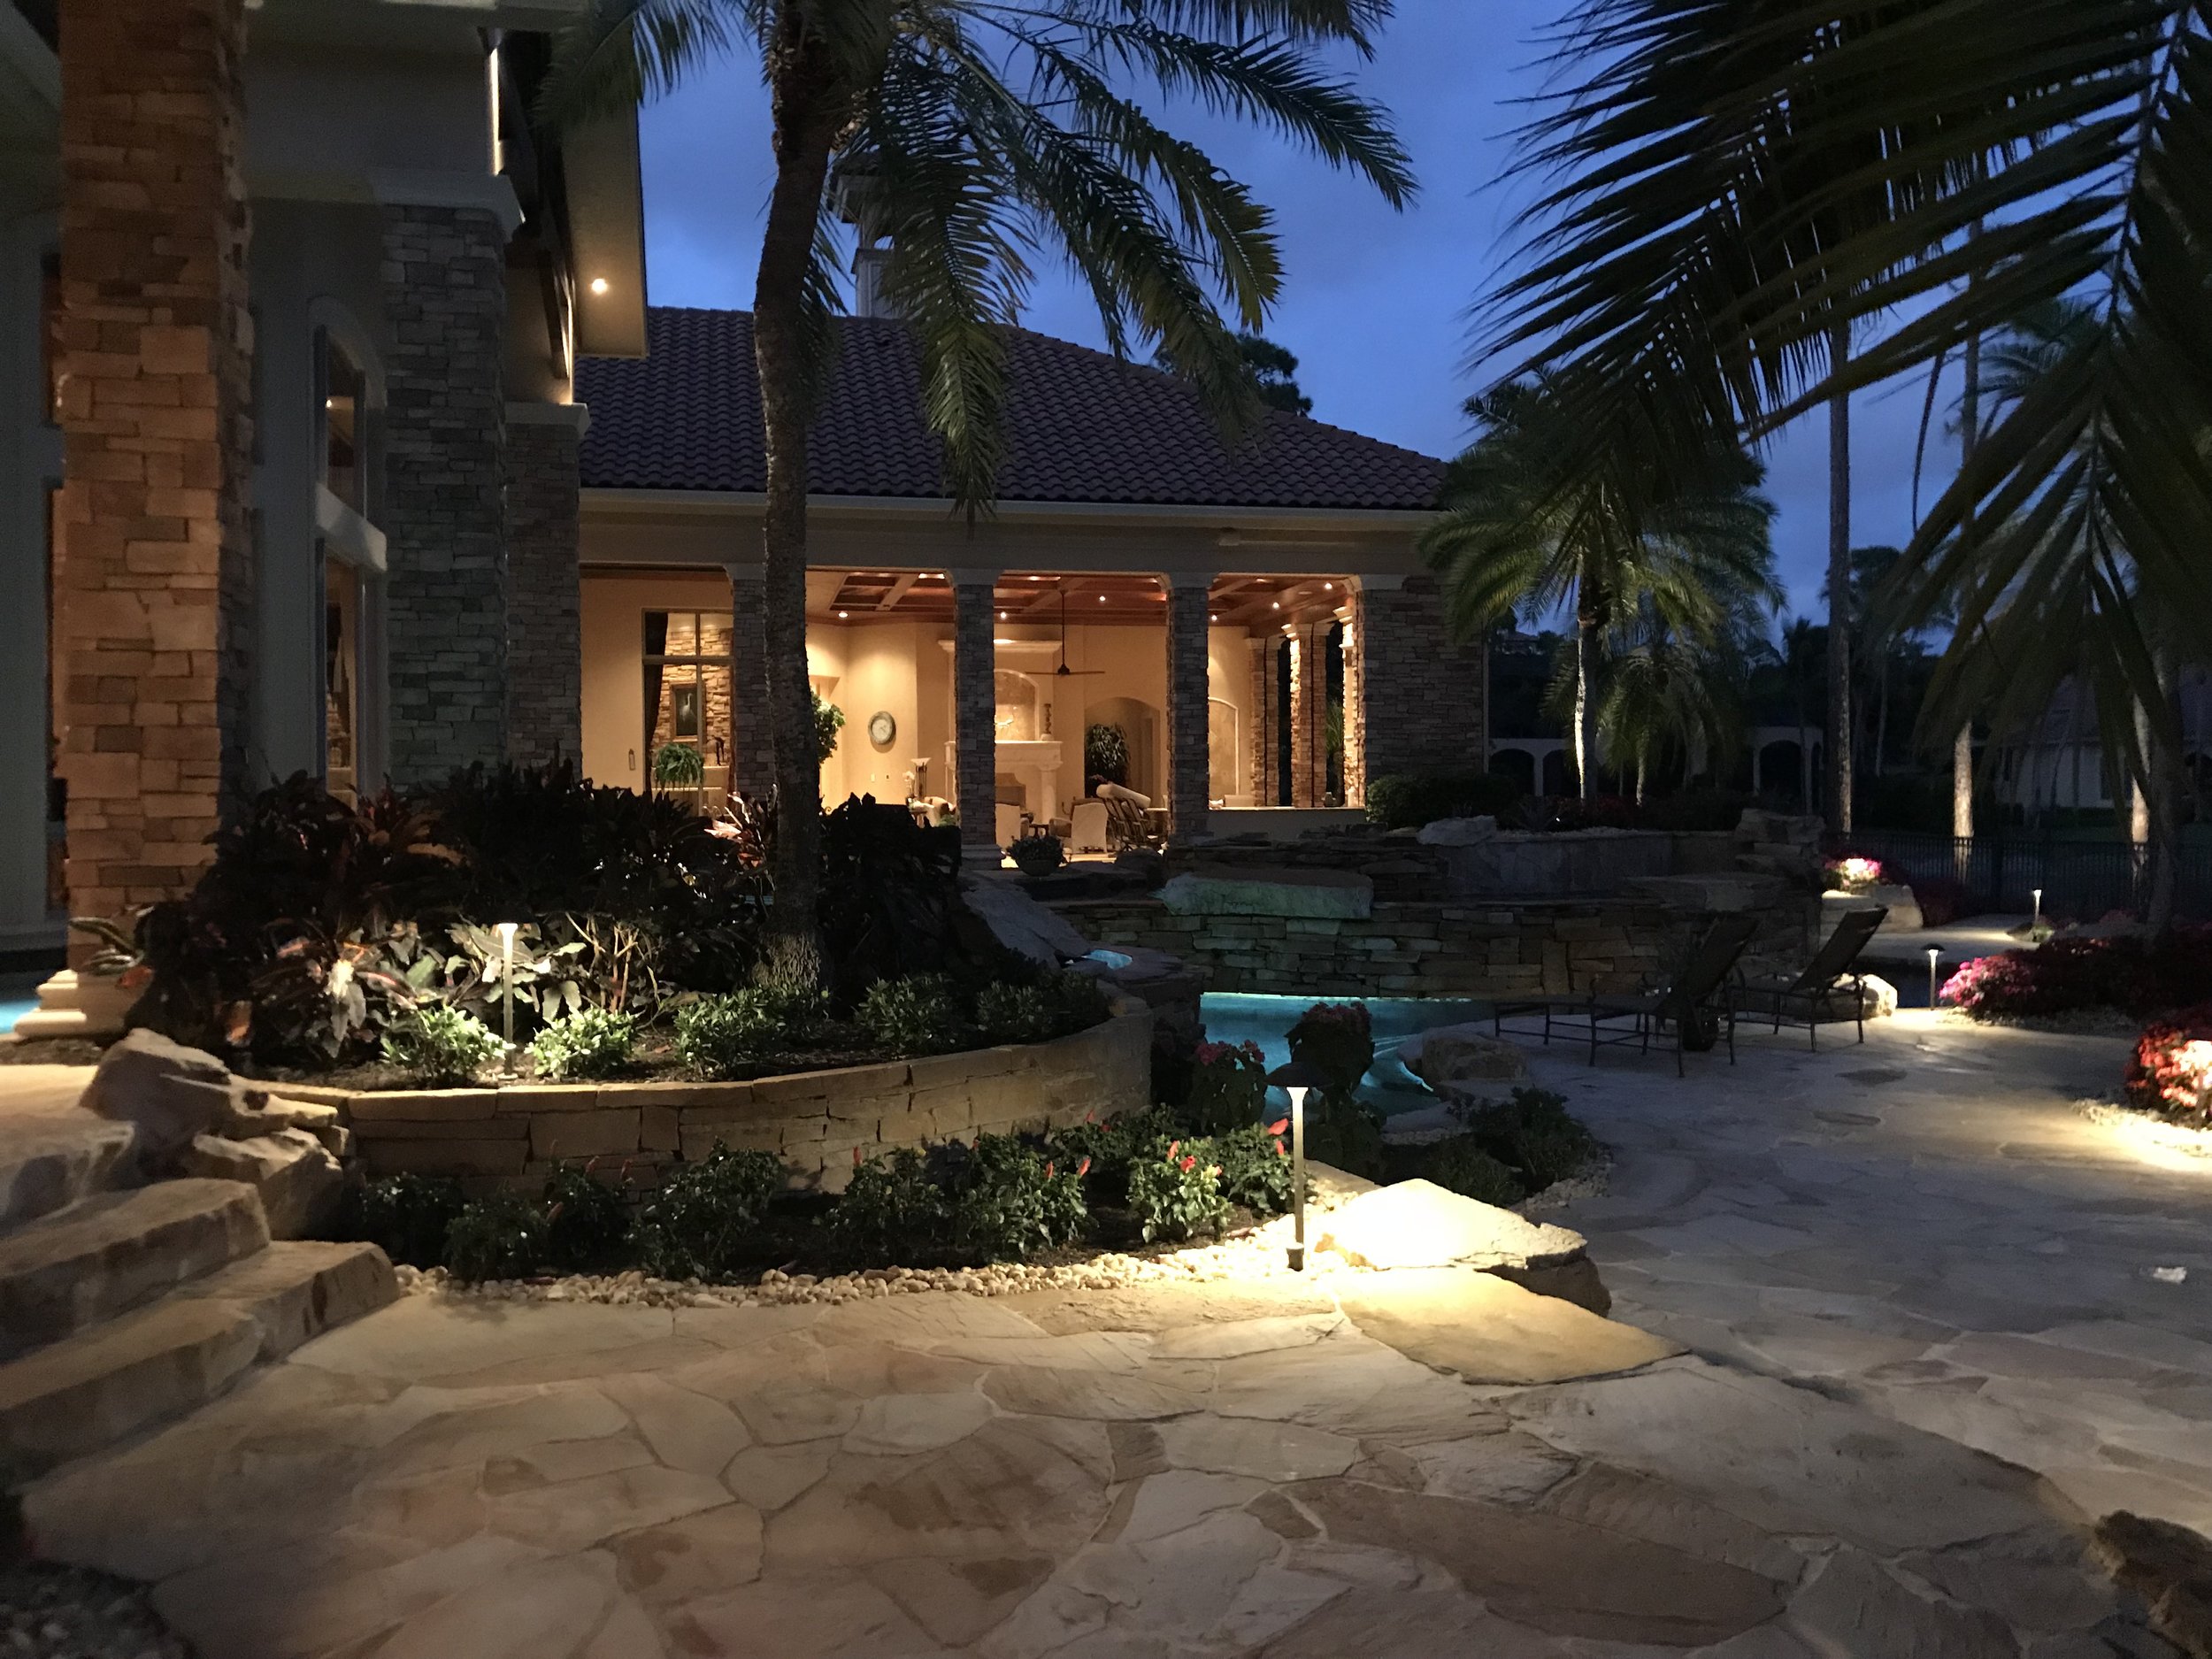  QUALITY LOW VOLTAGE LANDSCAPE LIGHTING SYSTEMS FOR HOME AND BUSINESS   Get On With It!  